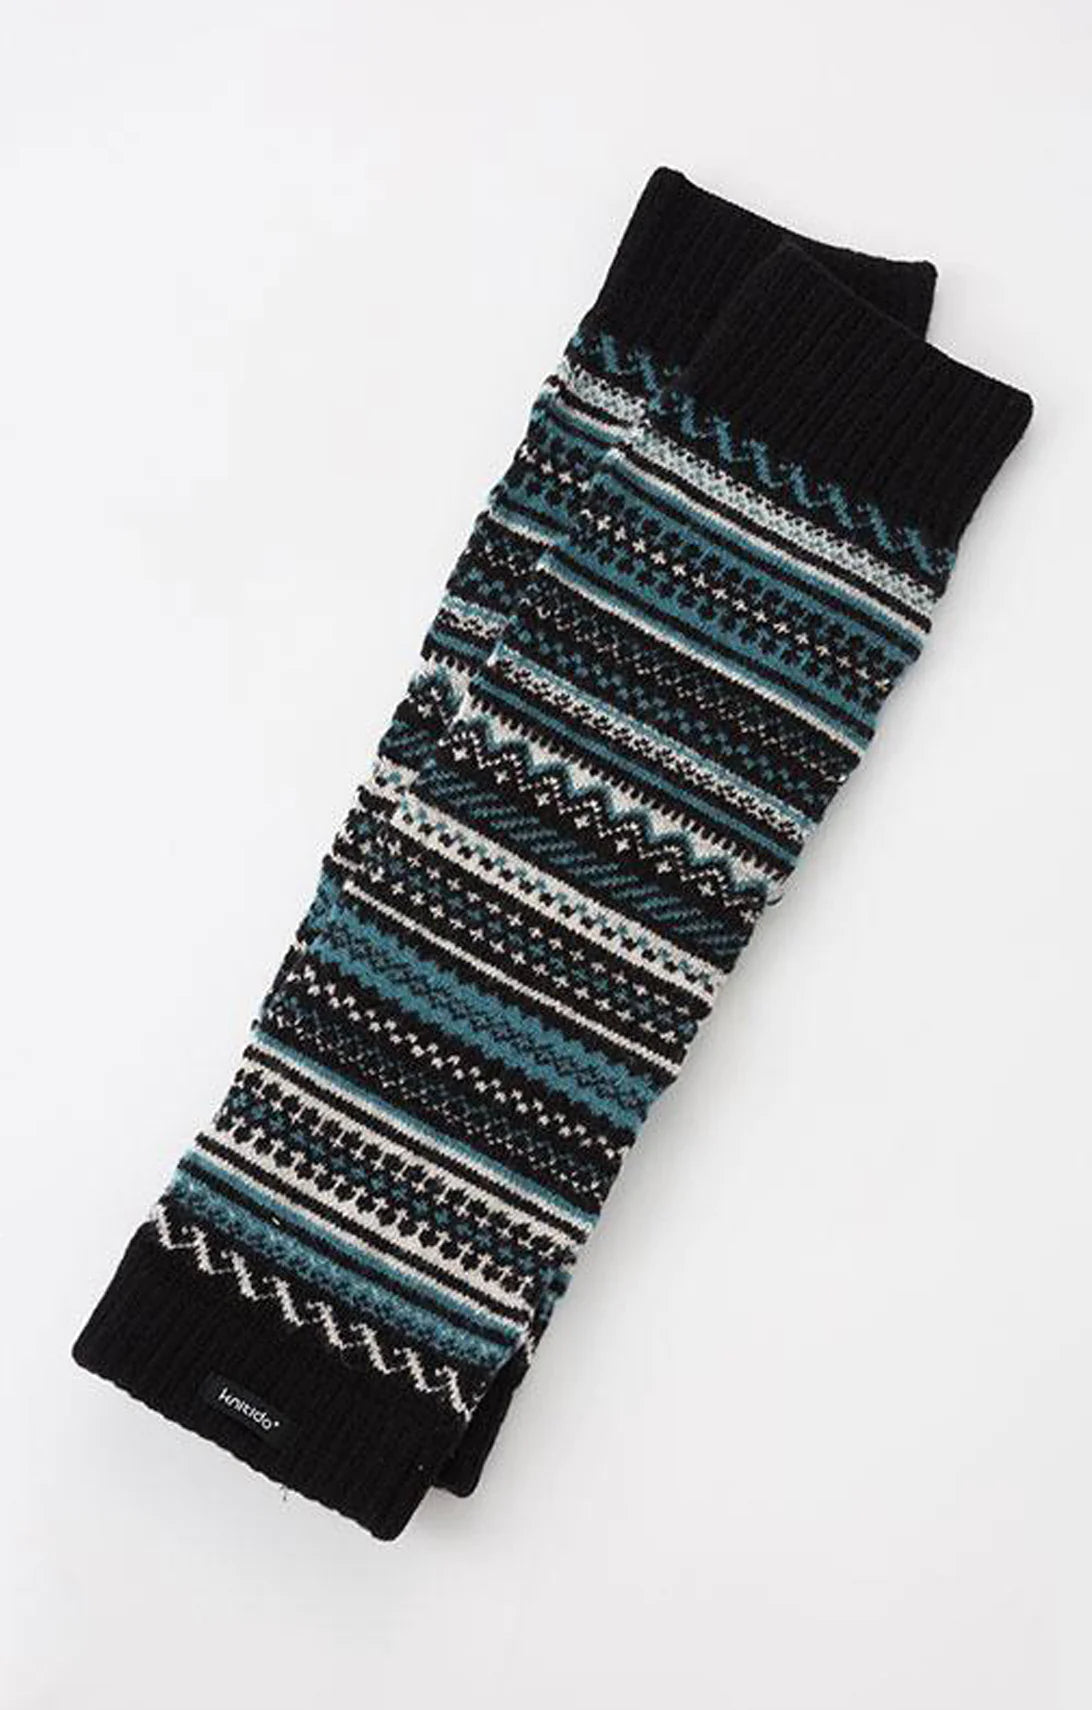 This is a photo of the product name Wool Blend Fair Isle Leg Warmer in BLACK/TEAL/WHITE colors under the brand name Knitido+.